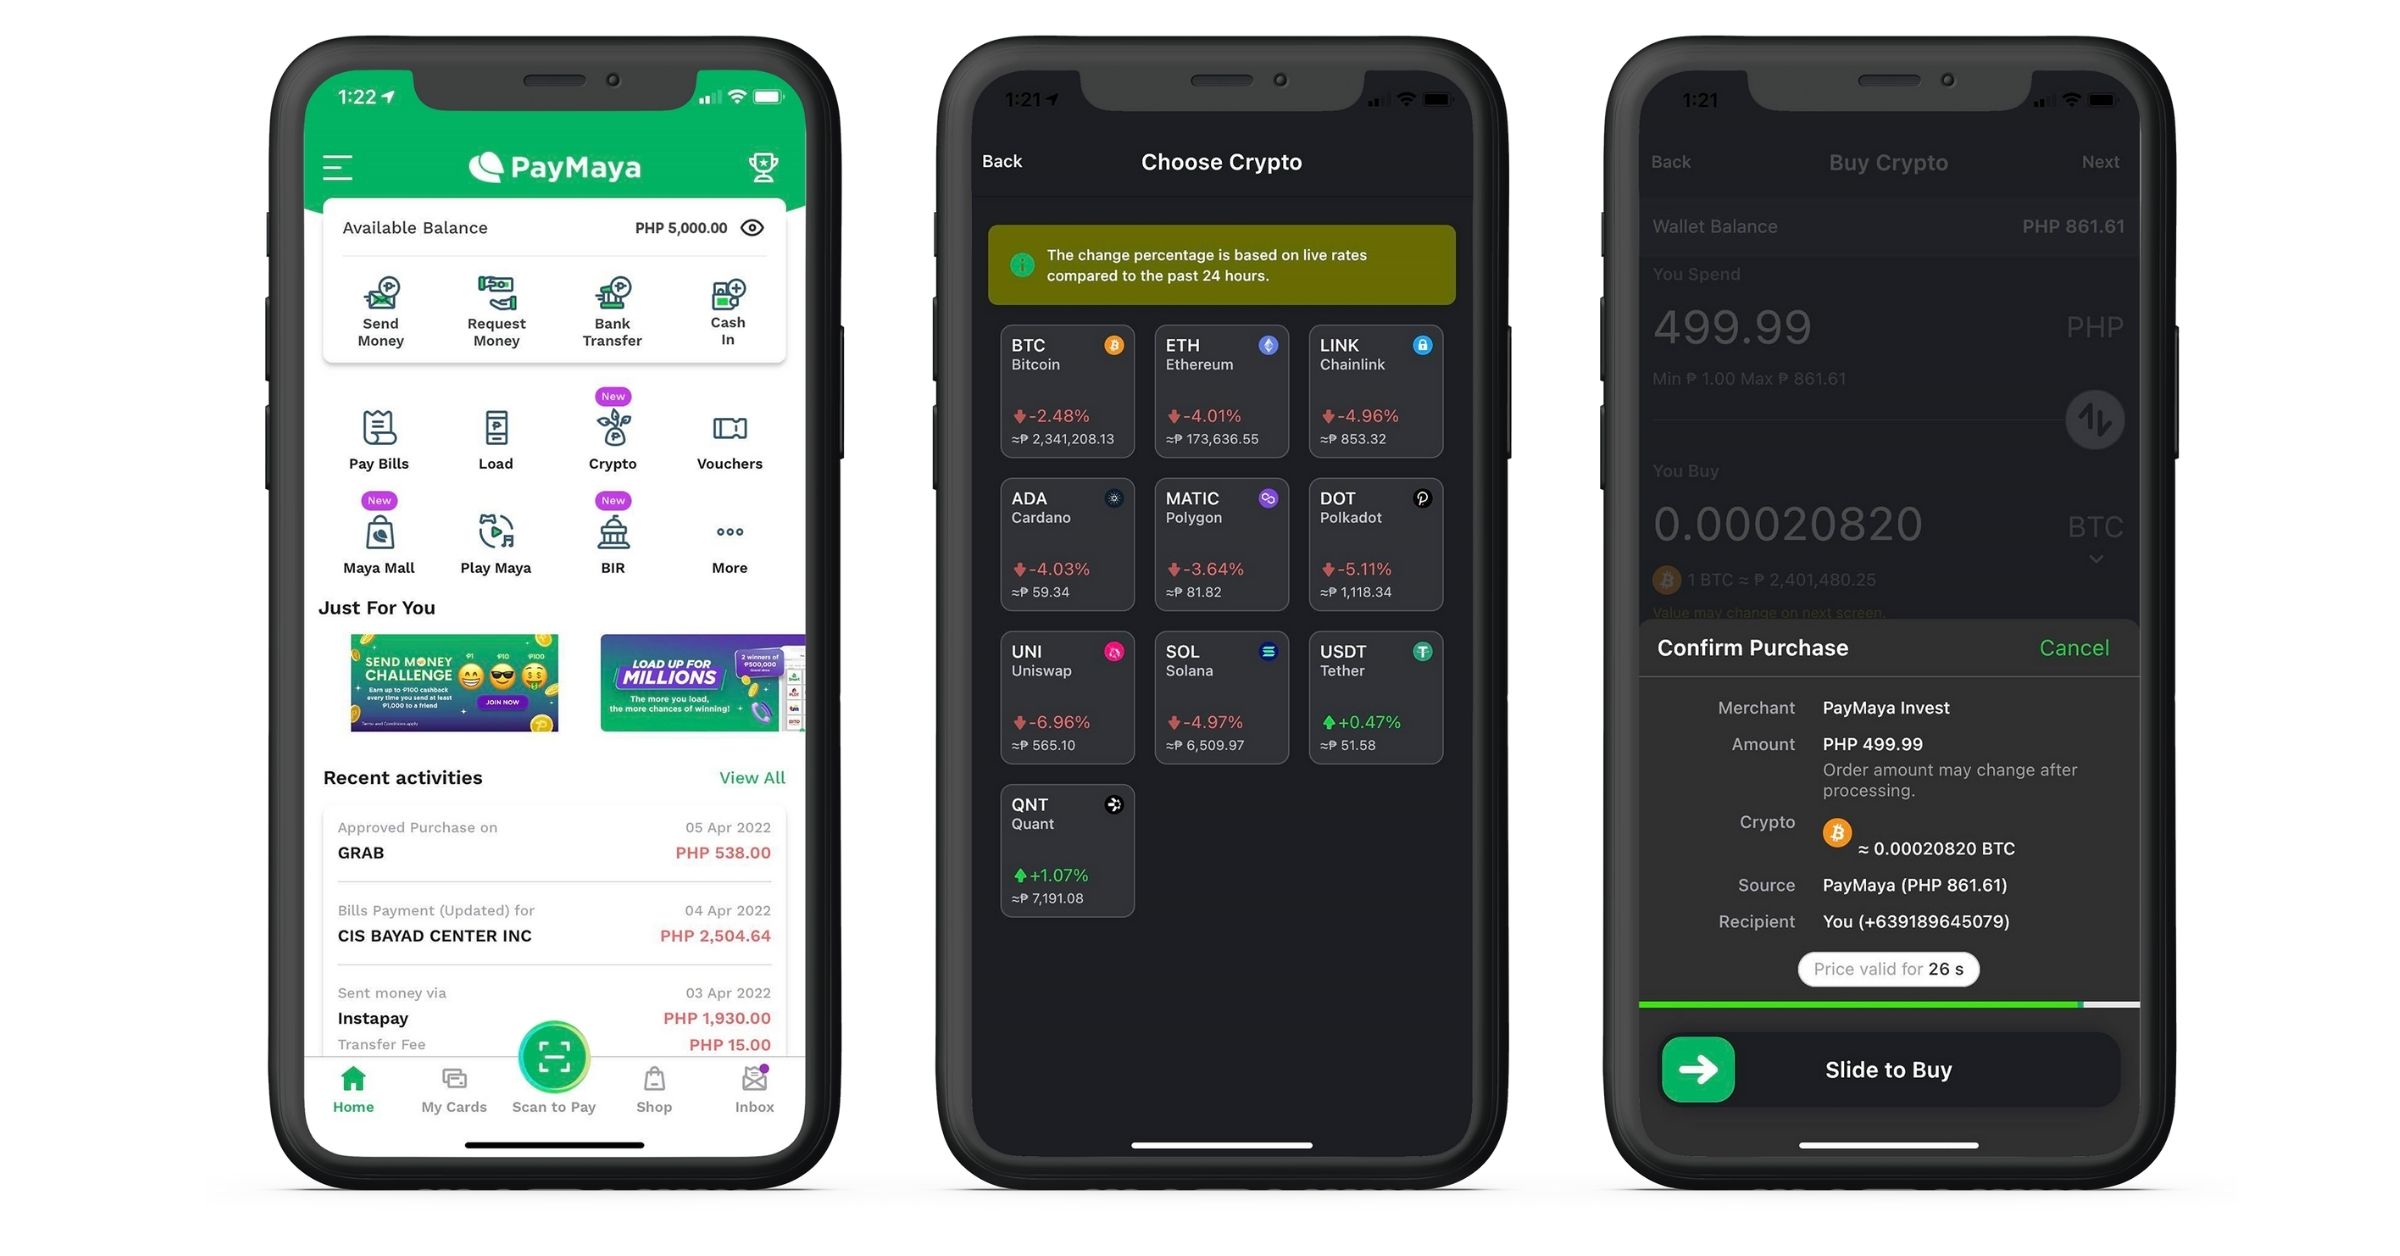 PayMaya makes it easier than ever to start crypto journey with all-in-one app experience